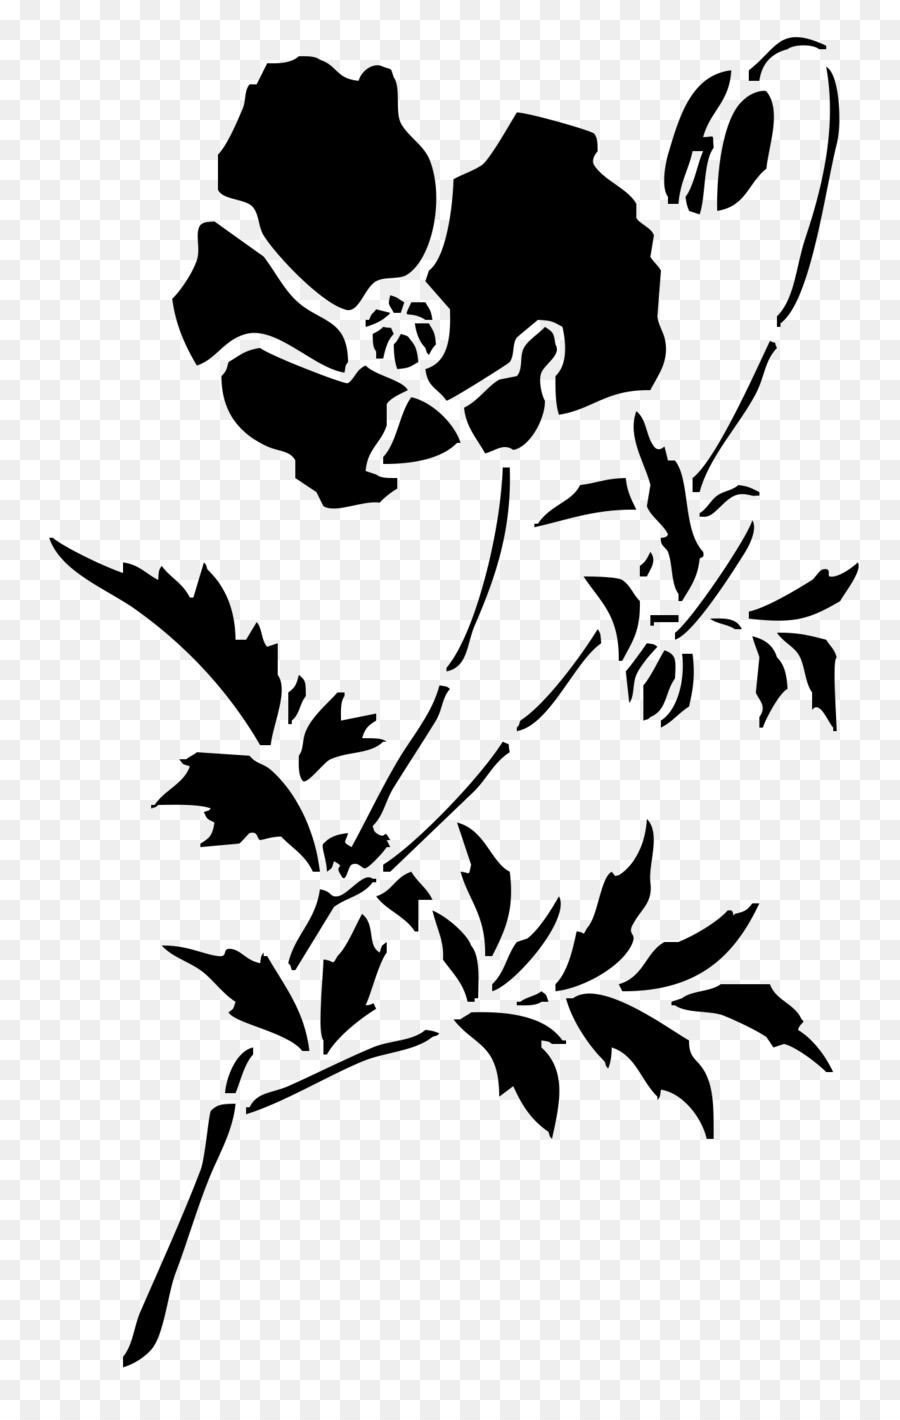 Stencil Silhouette Street art Drawing - poppy stencil png download - 1280*2000 - Free Transparent Stencil png Download.